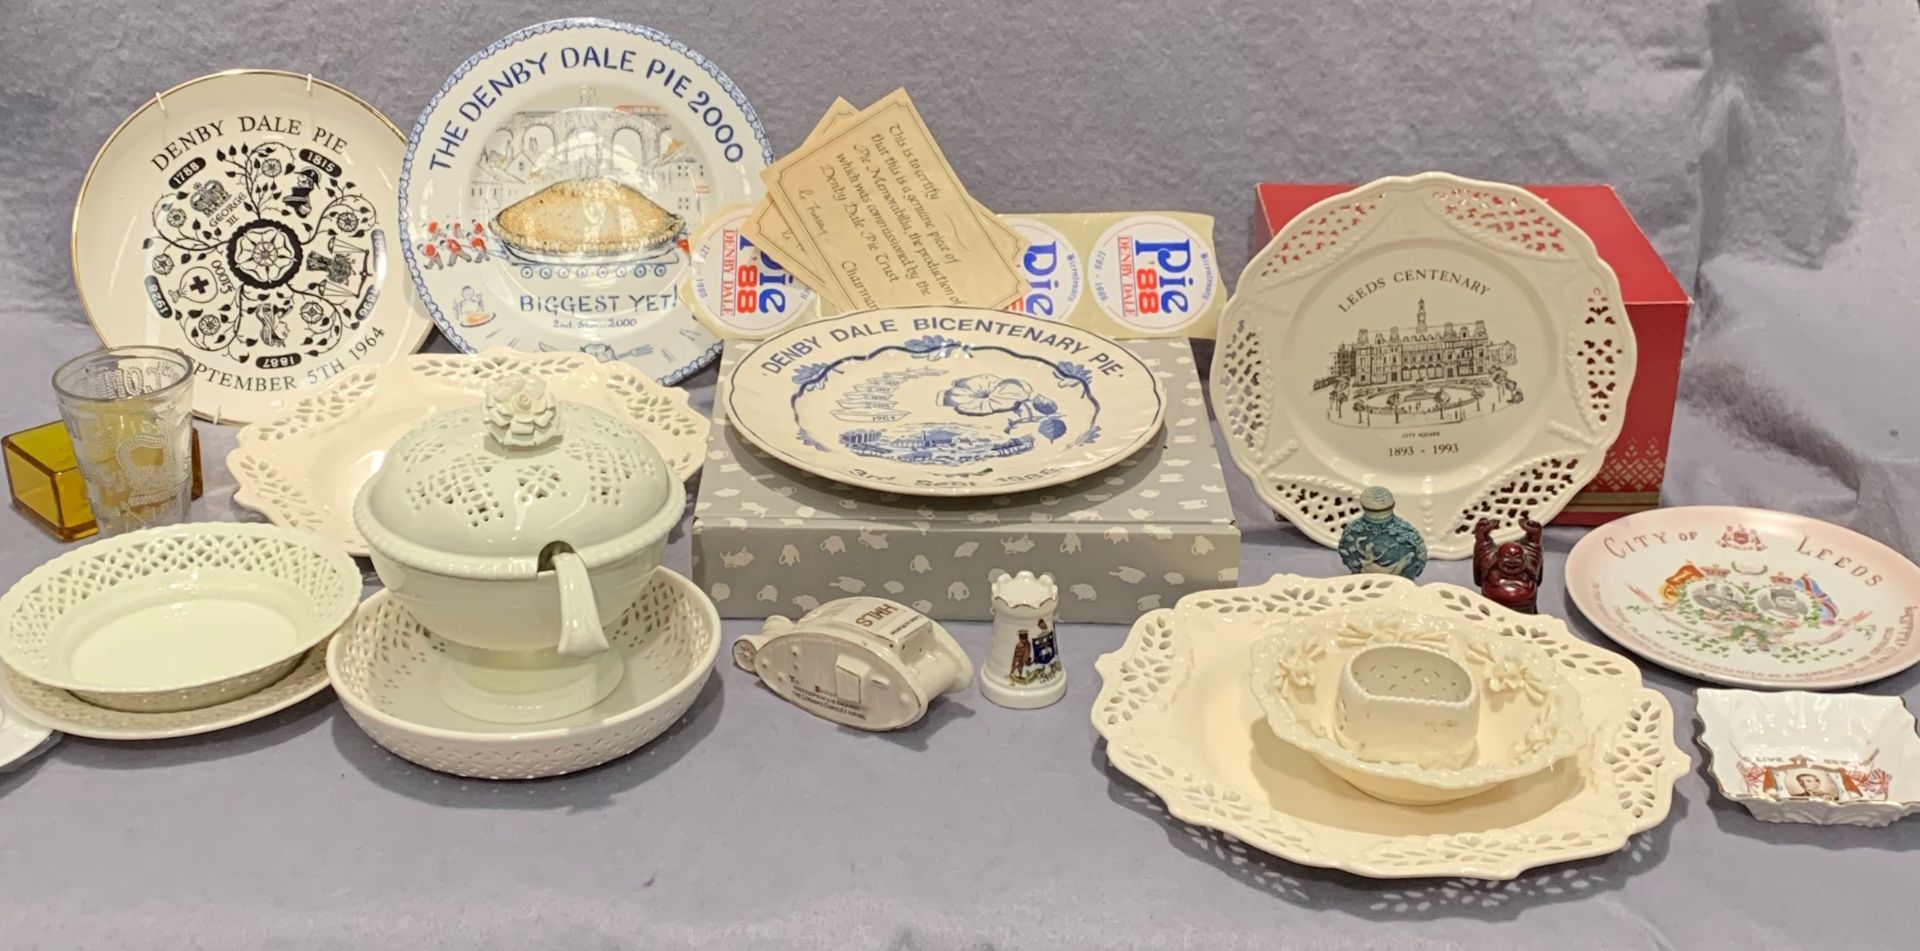 A collection of commemorative ware - Denby Dale Pie Plate 1964 and others, Leeds plates, - Image 2 of 2